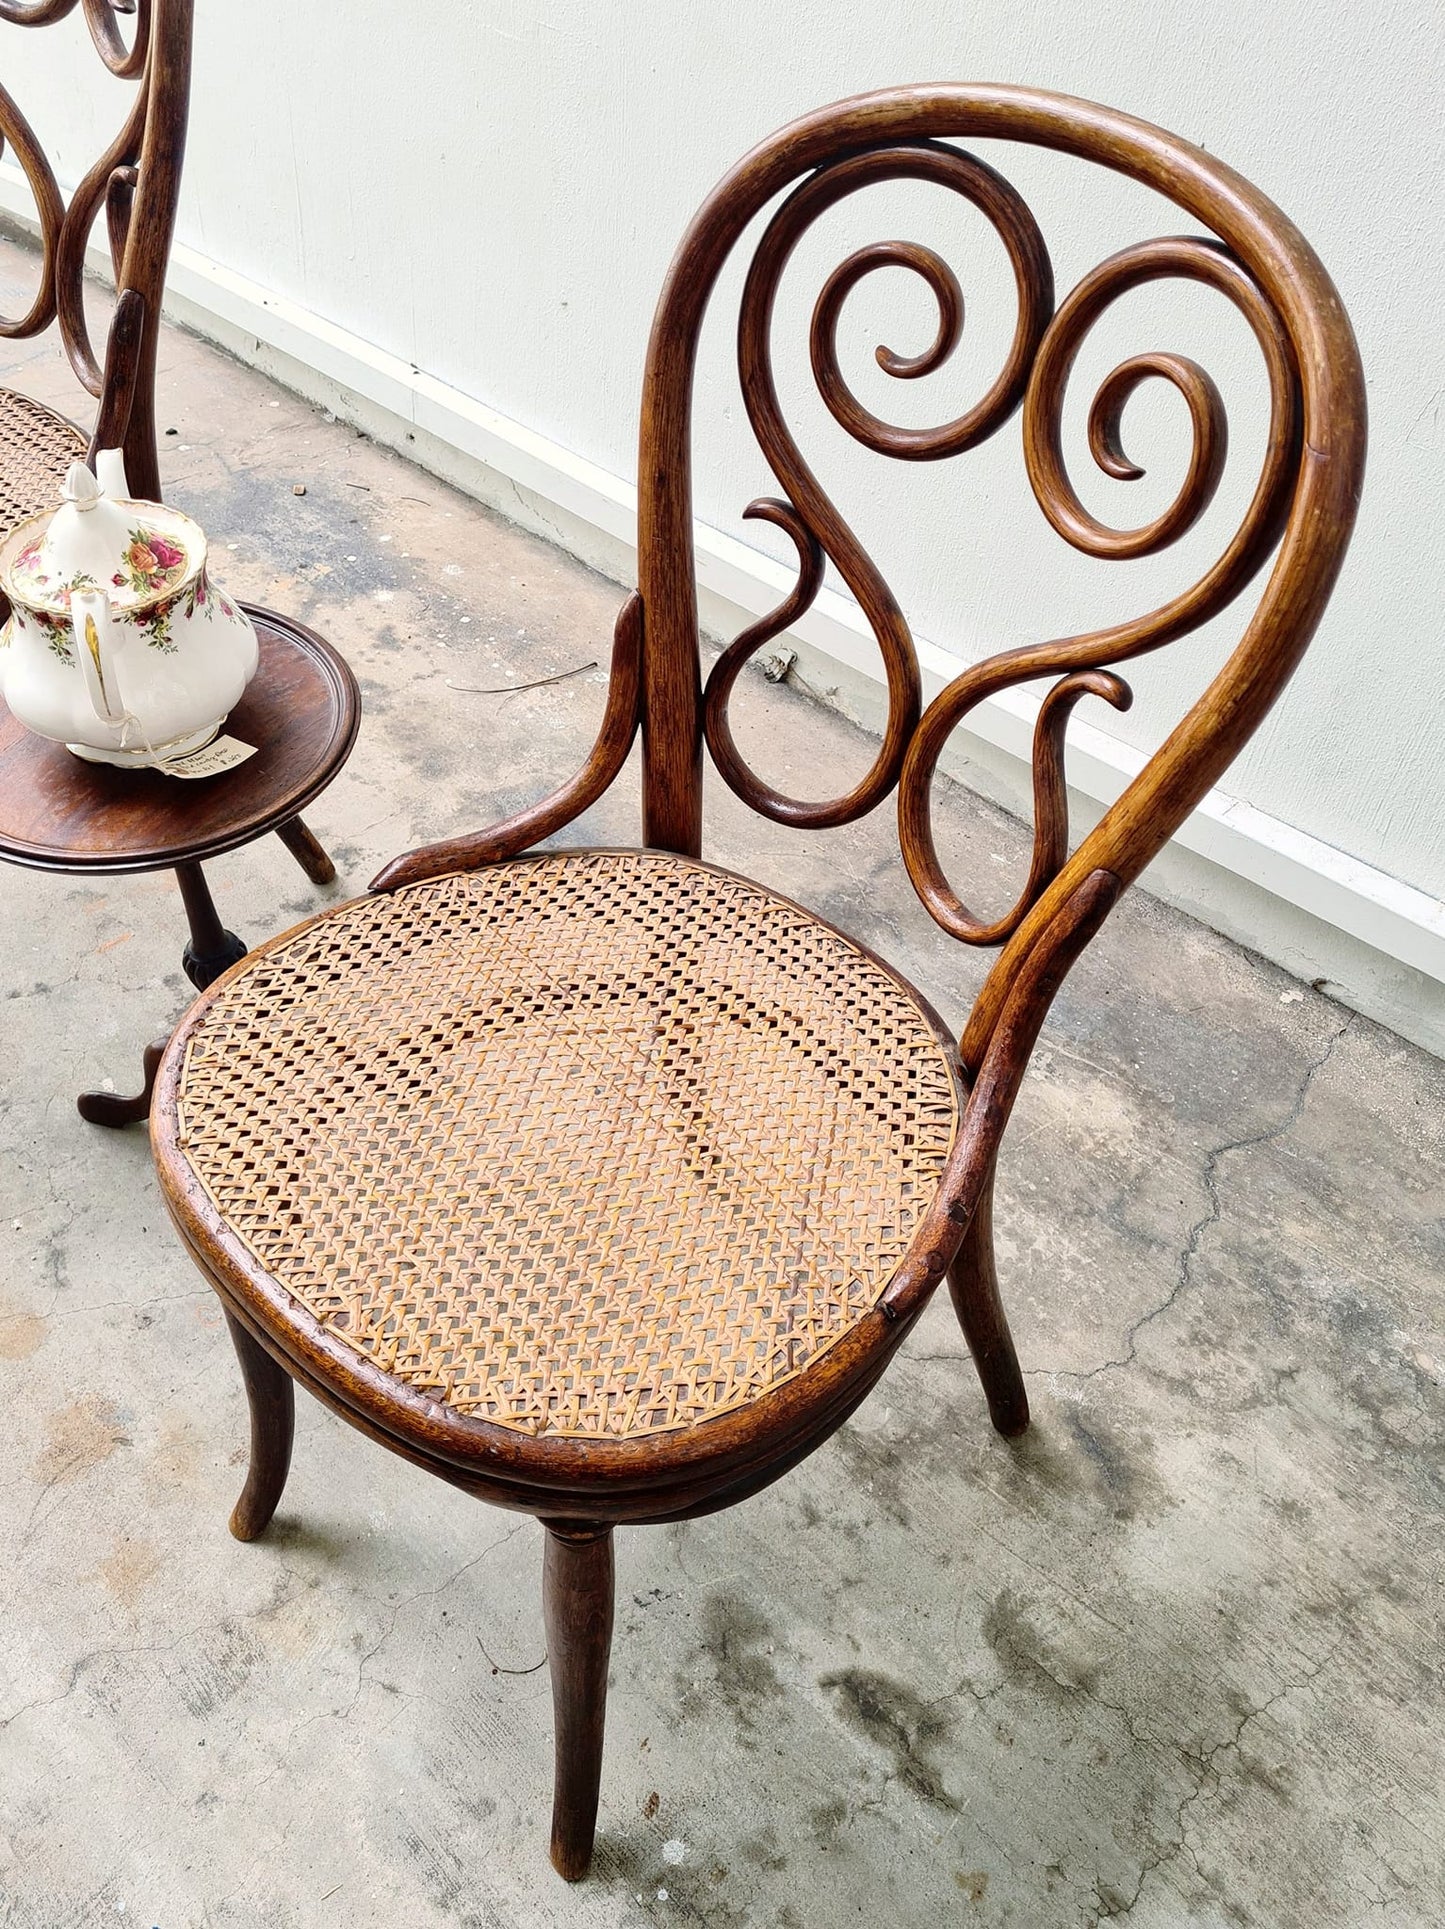 Vintage Thronet Bentwood chair imported from England